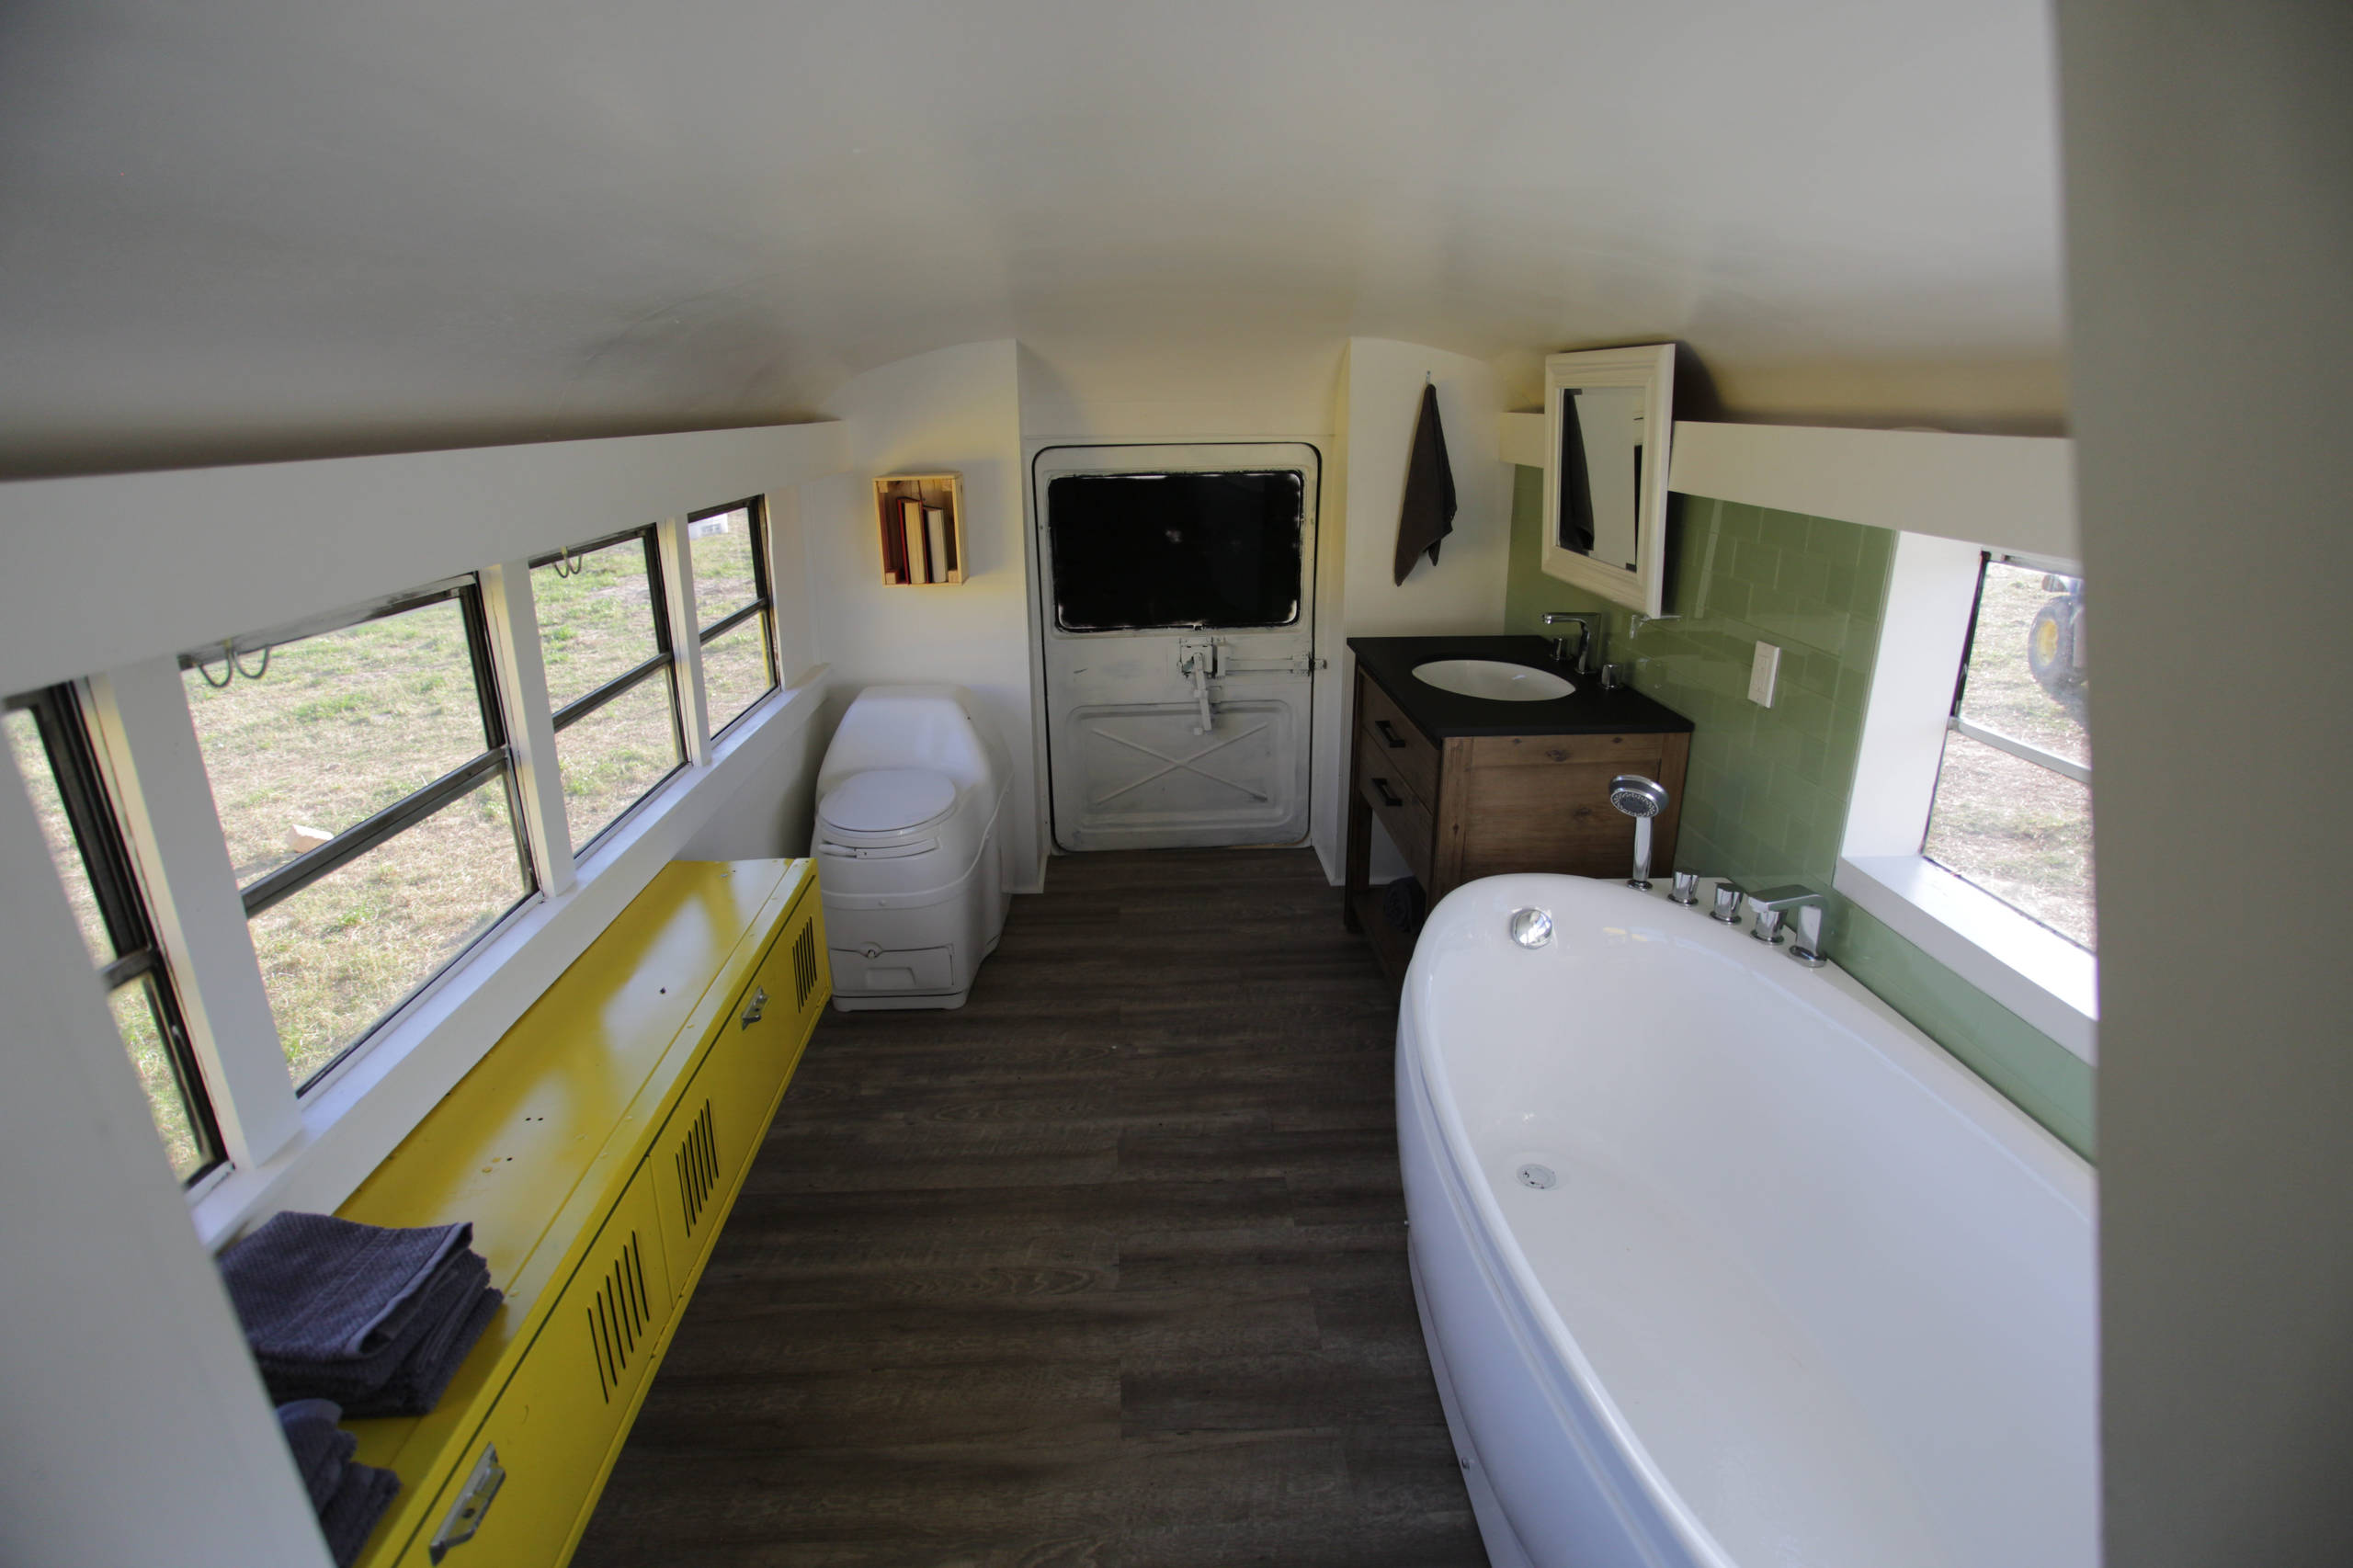 Vintage busses merge into a new tiny home